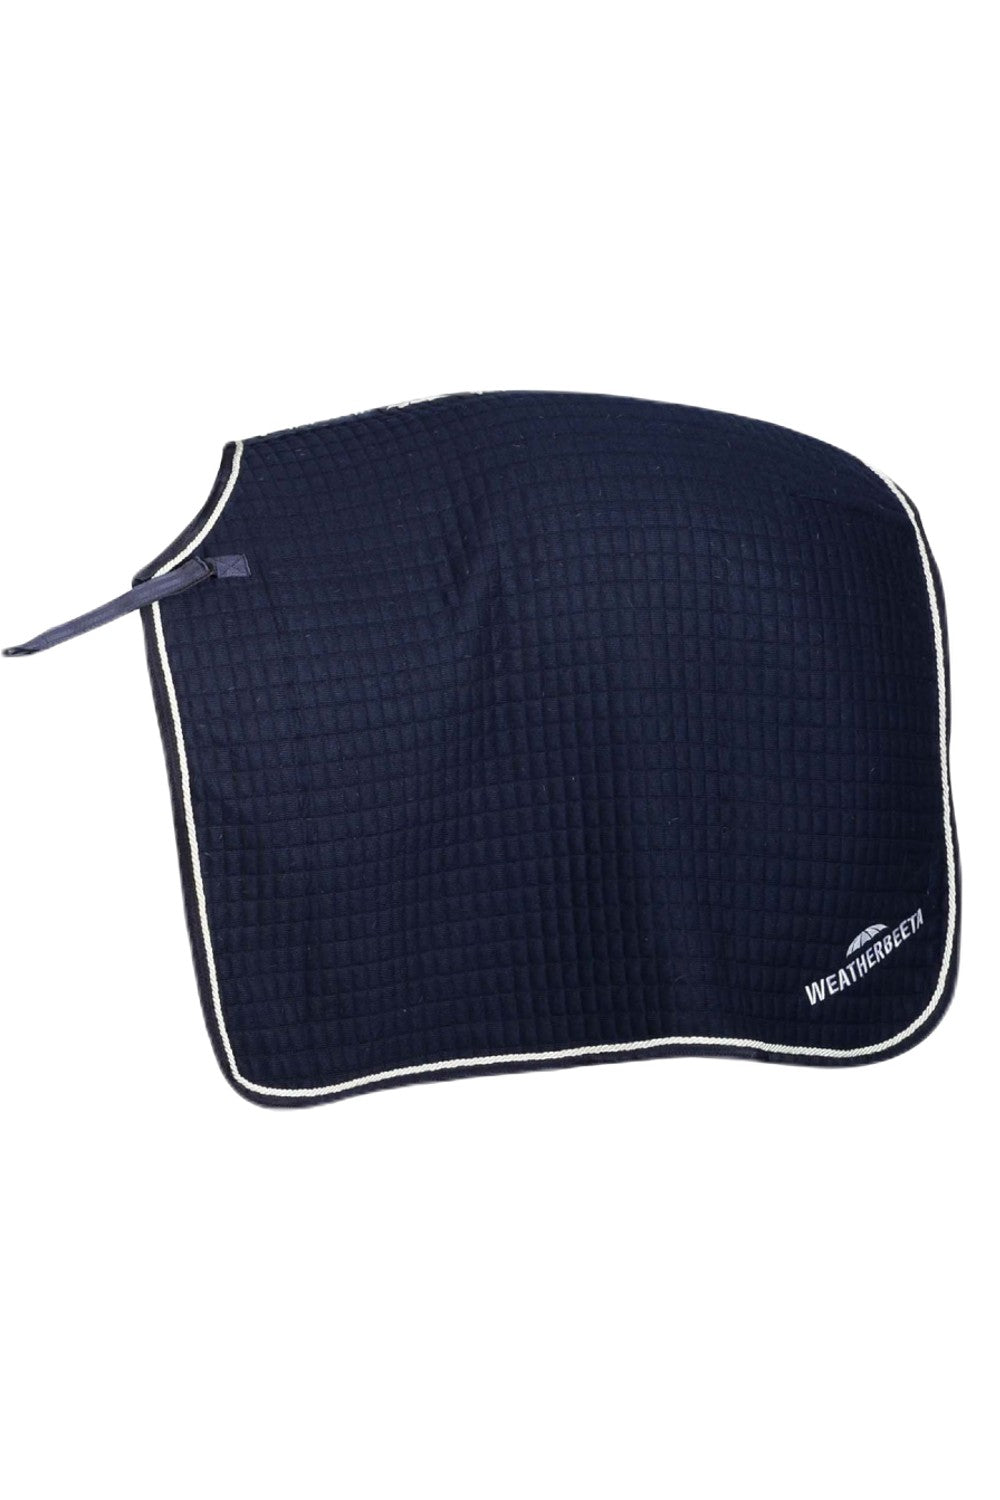 WeatherBeeta Thermocell Quarter Sheet in Navy White 